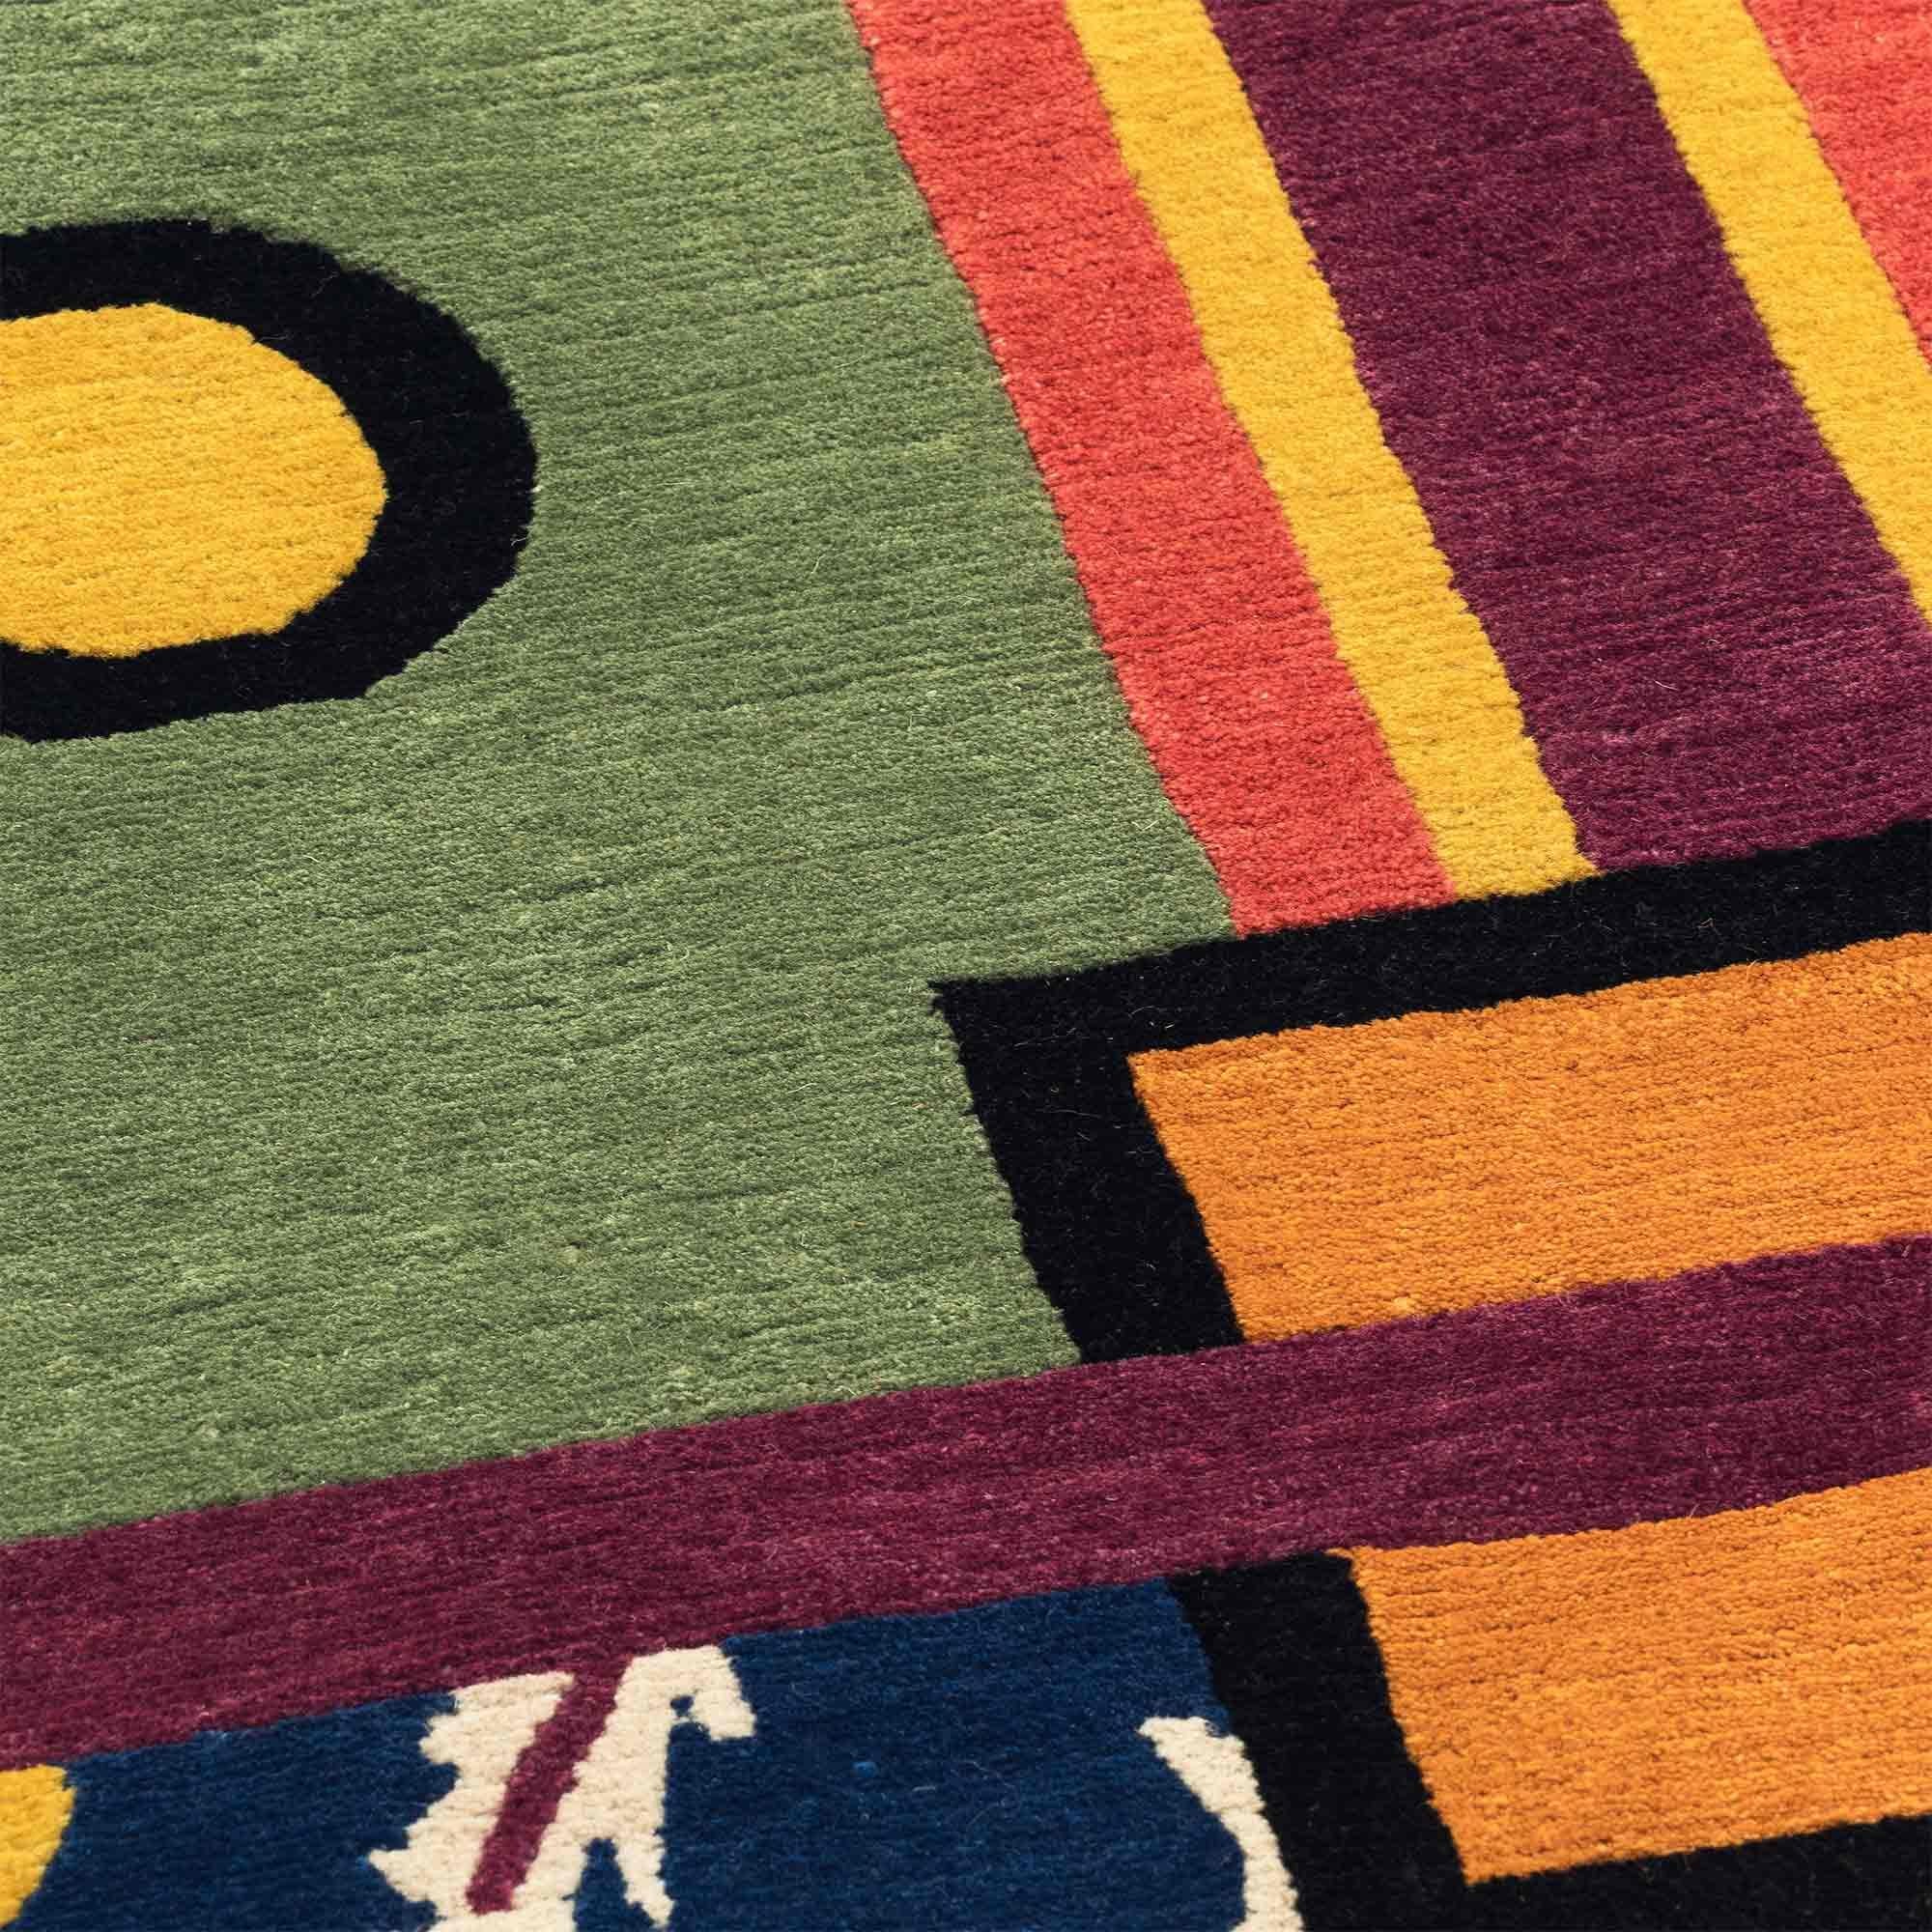 MESSICO woollen carpet by Nathalie du Pasquier for Post Design collection/Memphis

A woollen carpet handcrafted by different Nepalese artisans. Made in a limited edition of 36 signed, numbered examples.

As the carpet is made by hand, there are